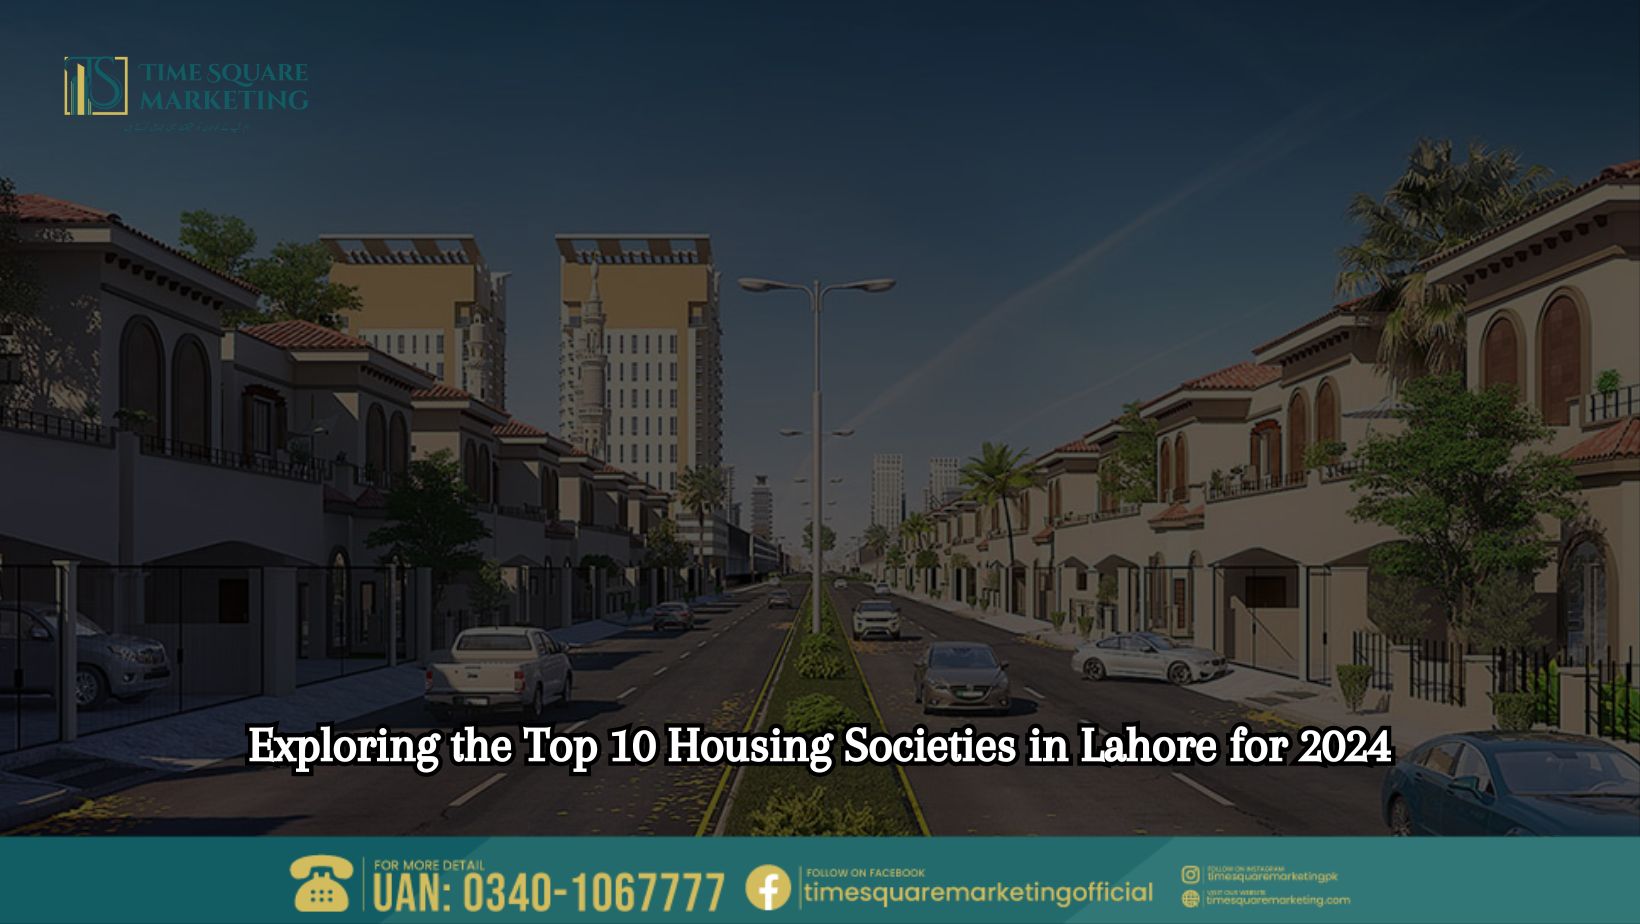 Exploring the Top 10 Housing Societies in Lahore for 2024